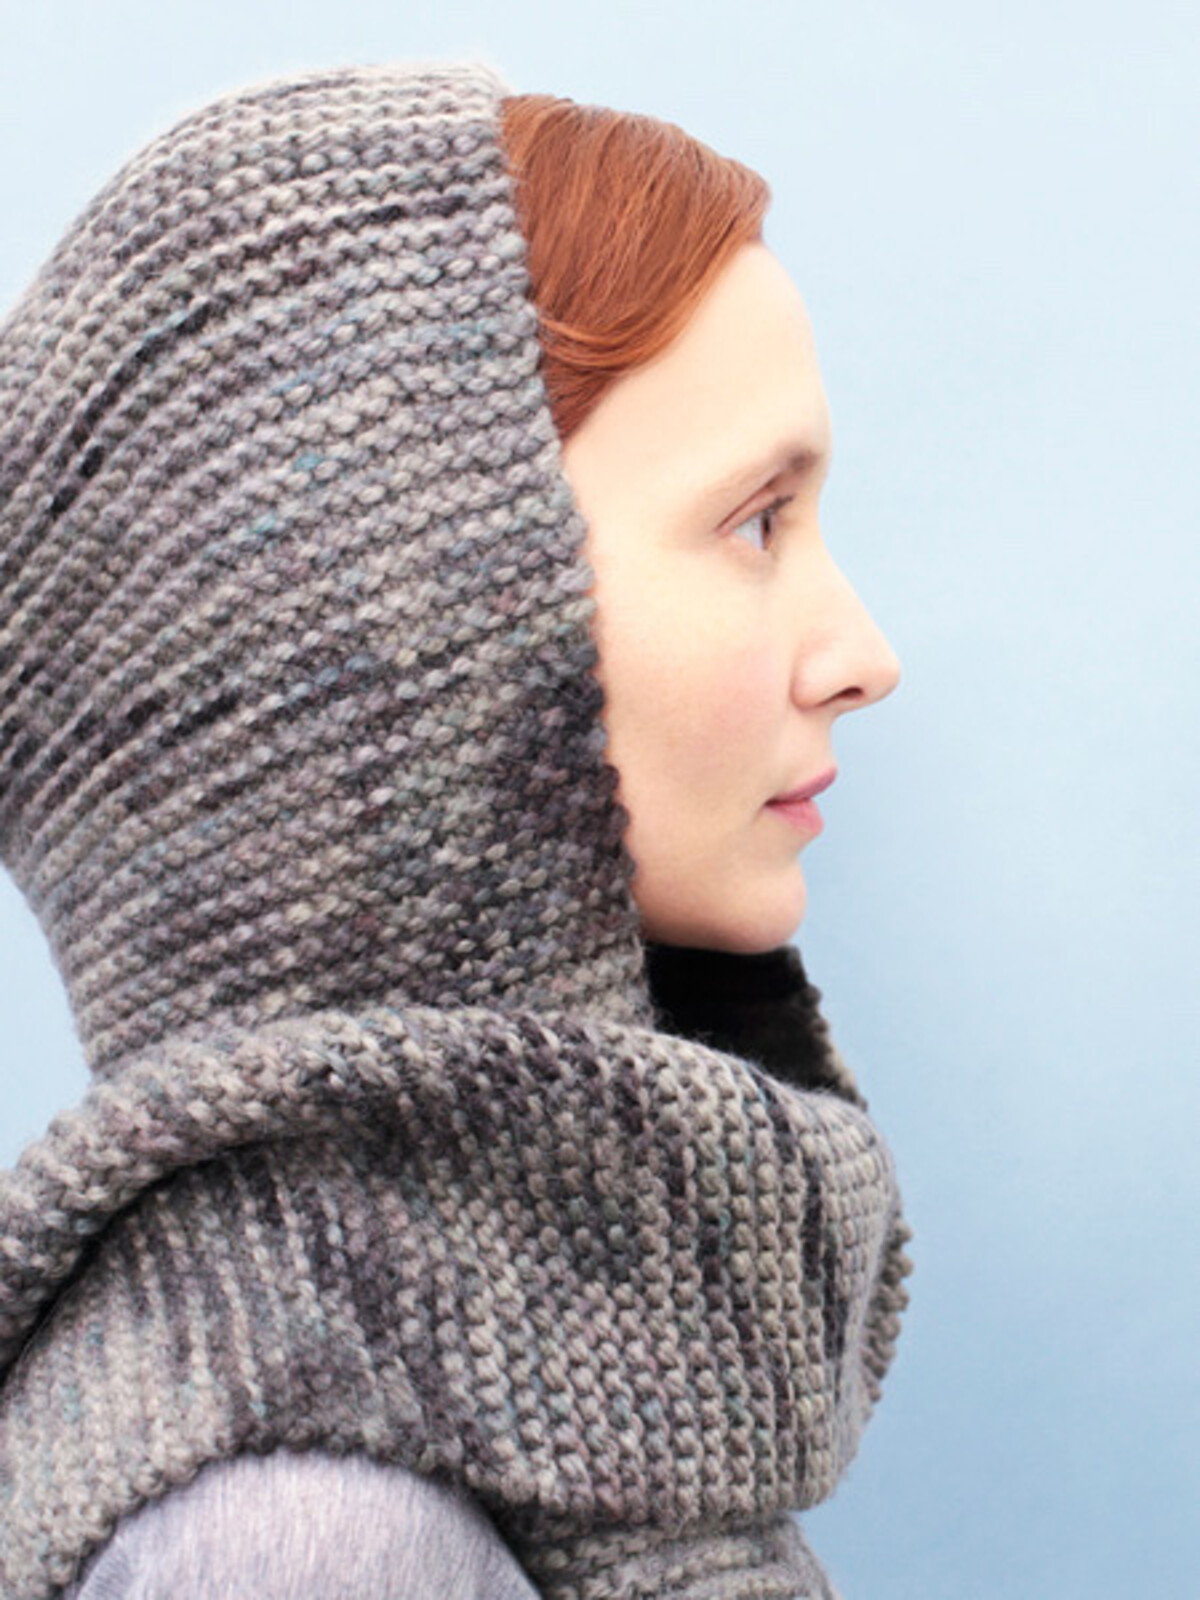 Hooded scarf Image